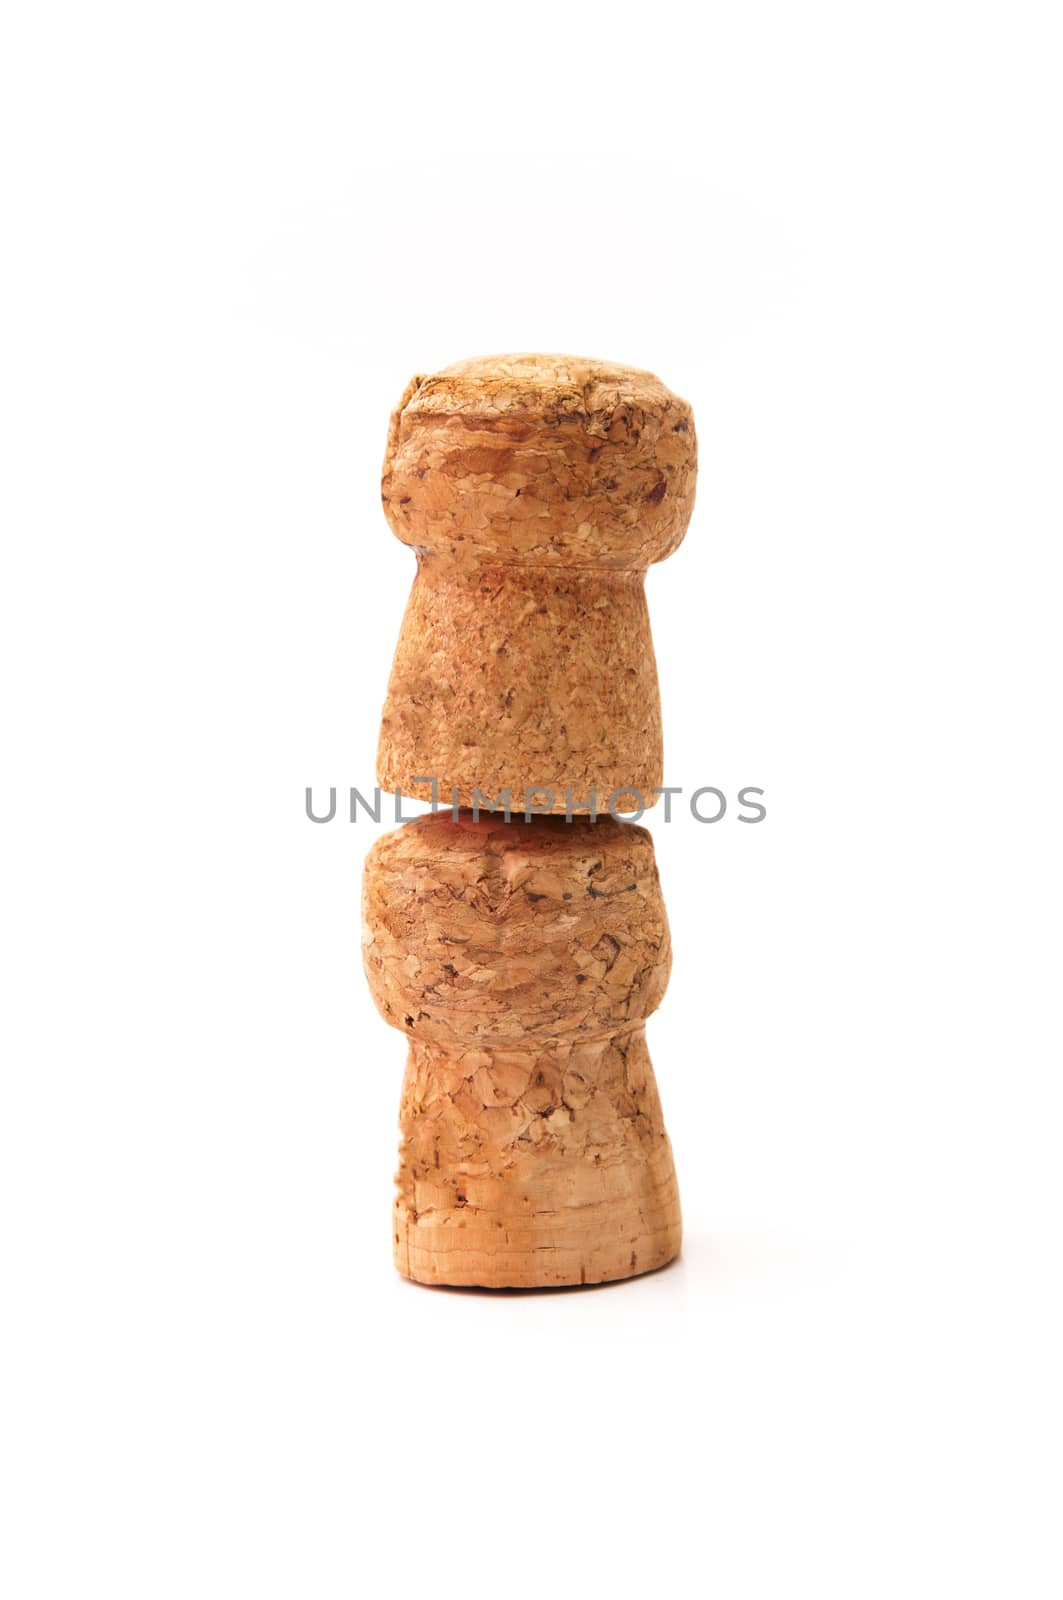 corks on a white background